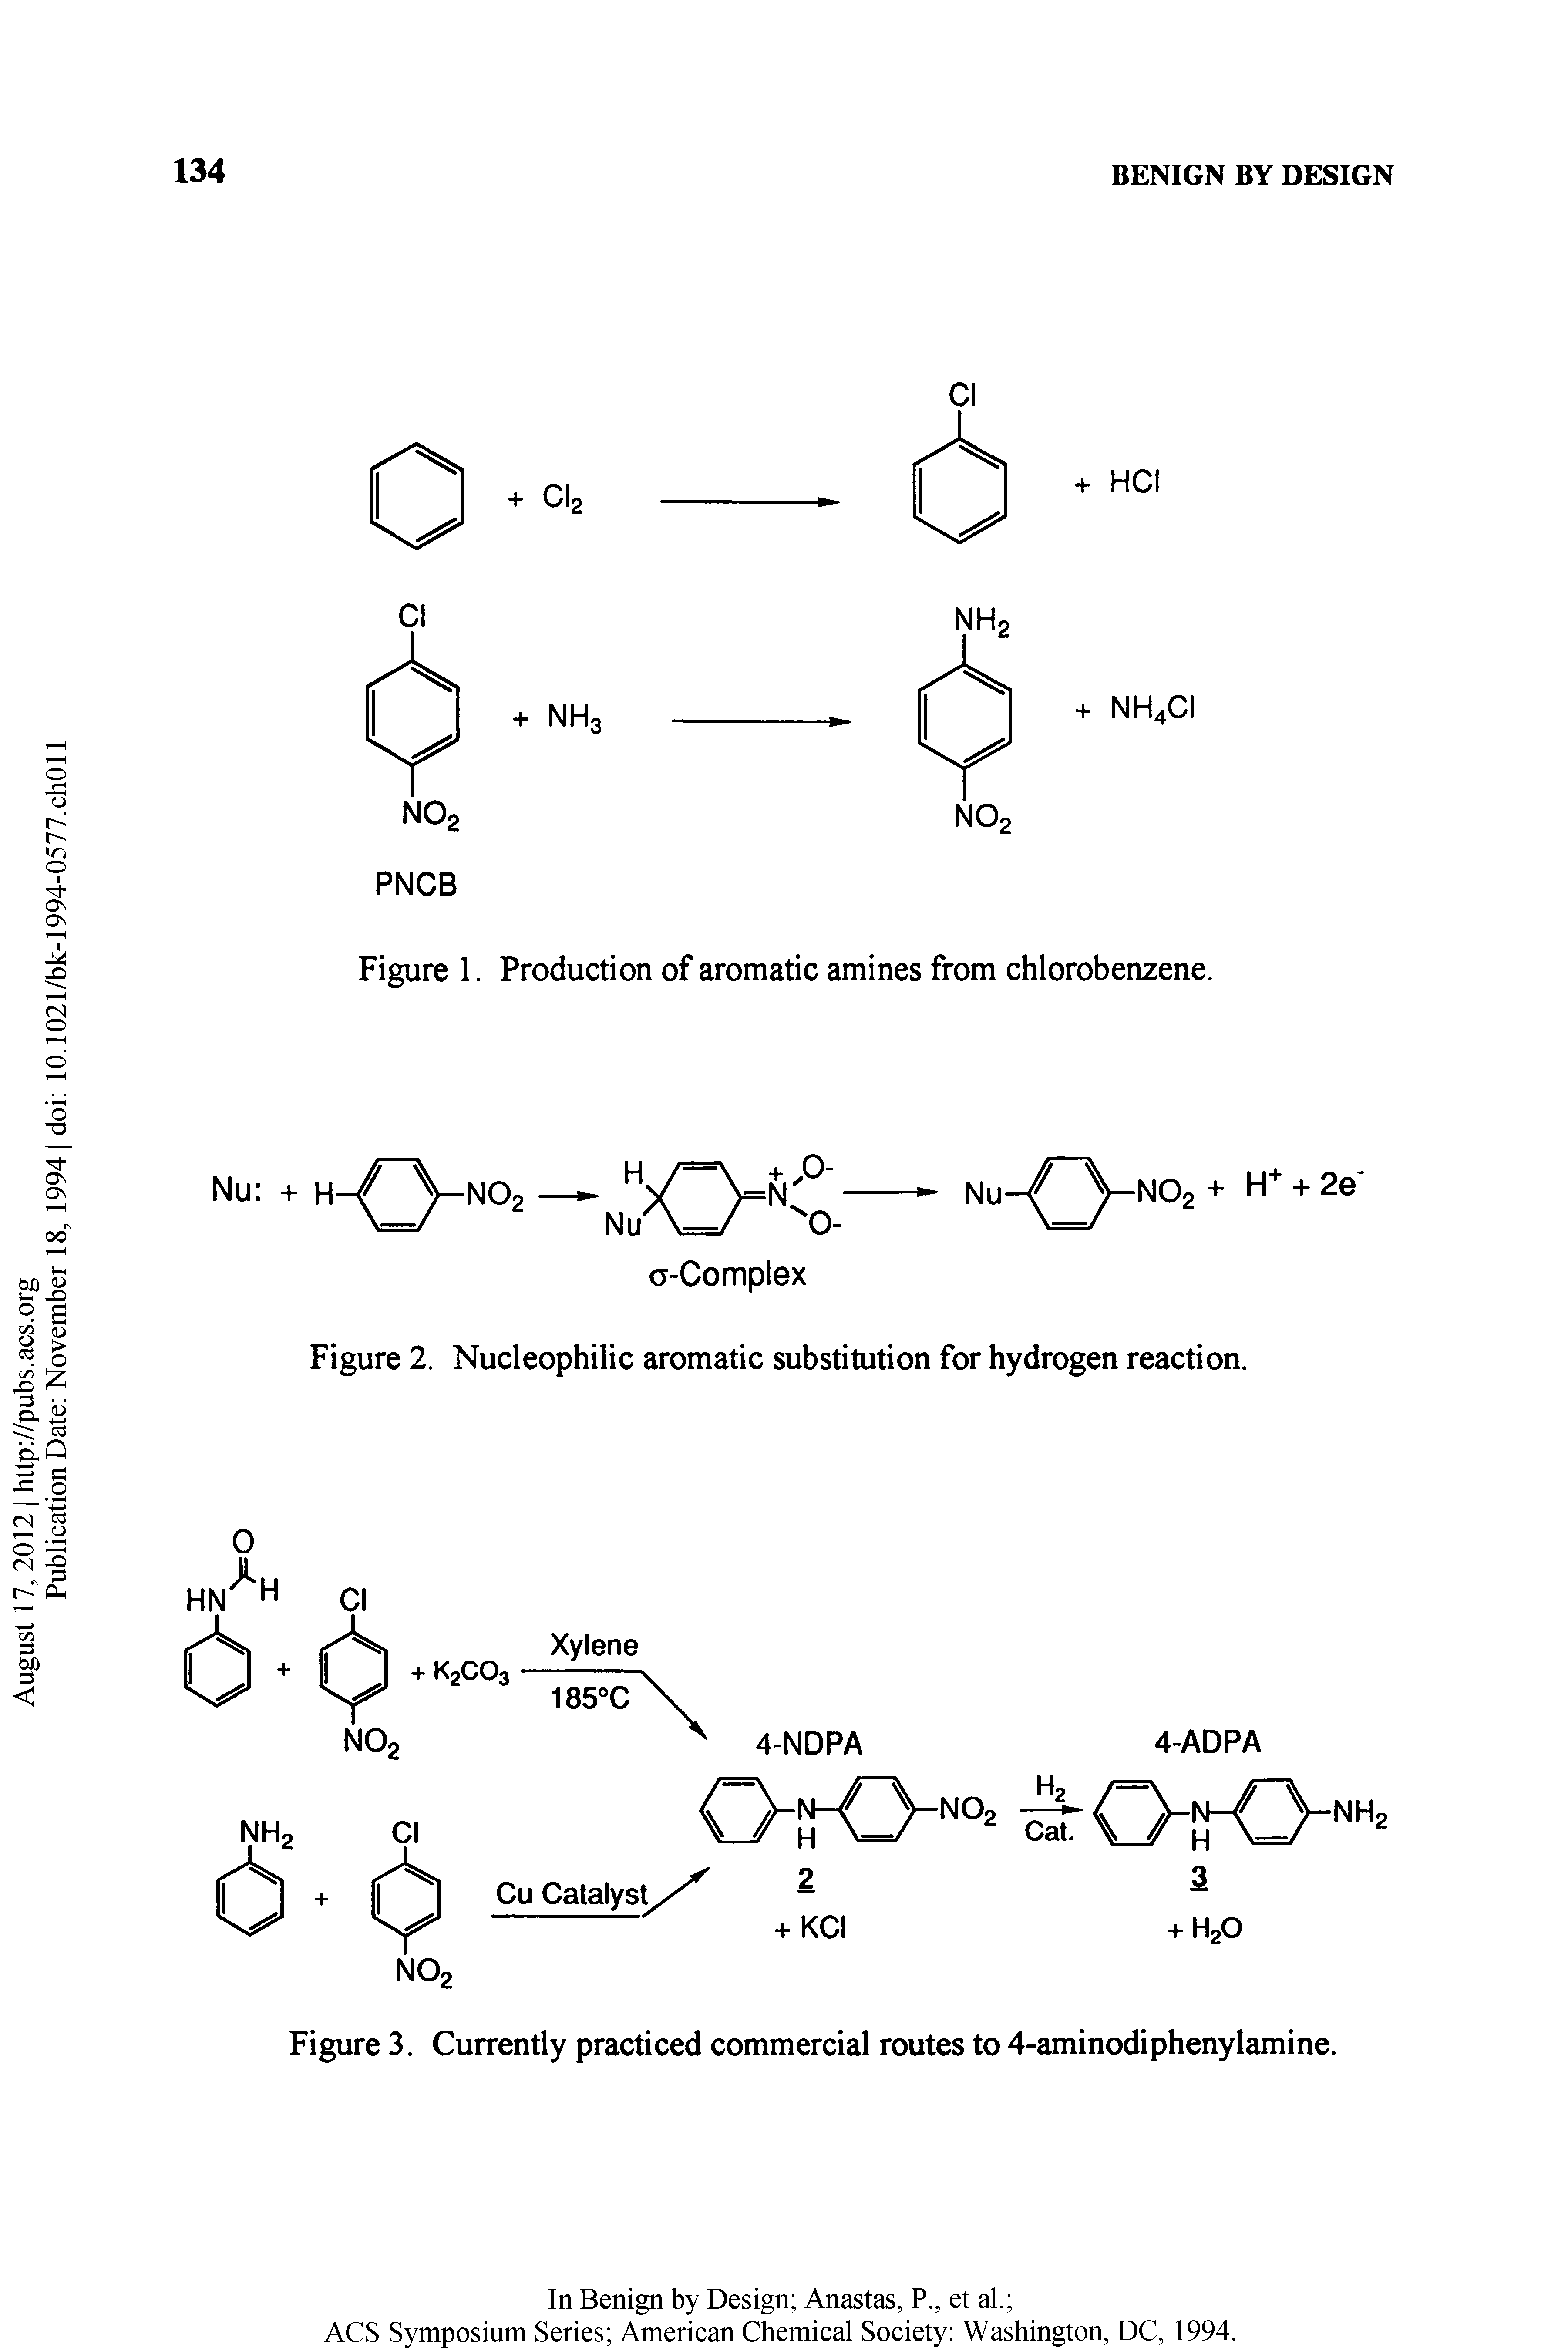 Figure 2. Nucleophilic aromatic substitution for hydrogen reaction.